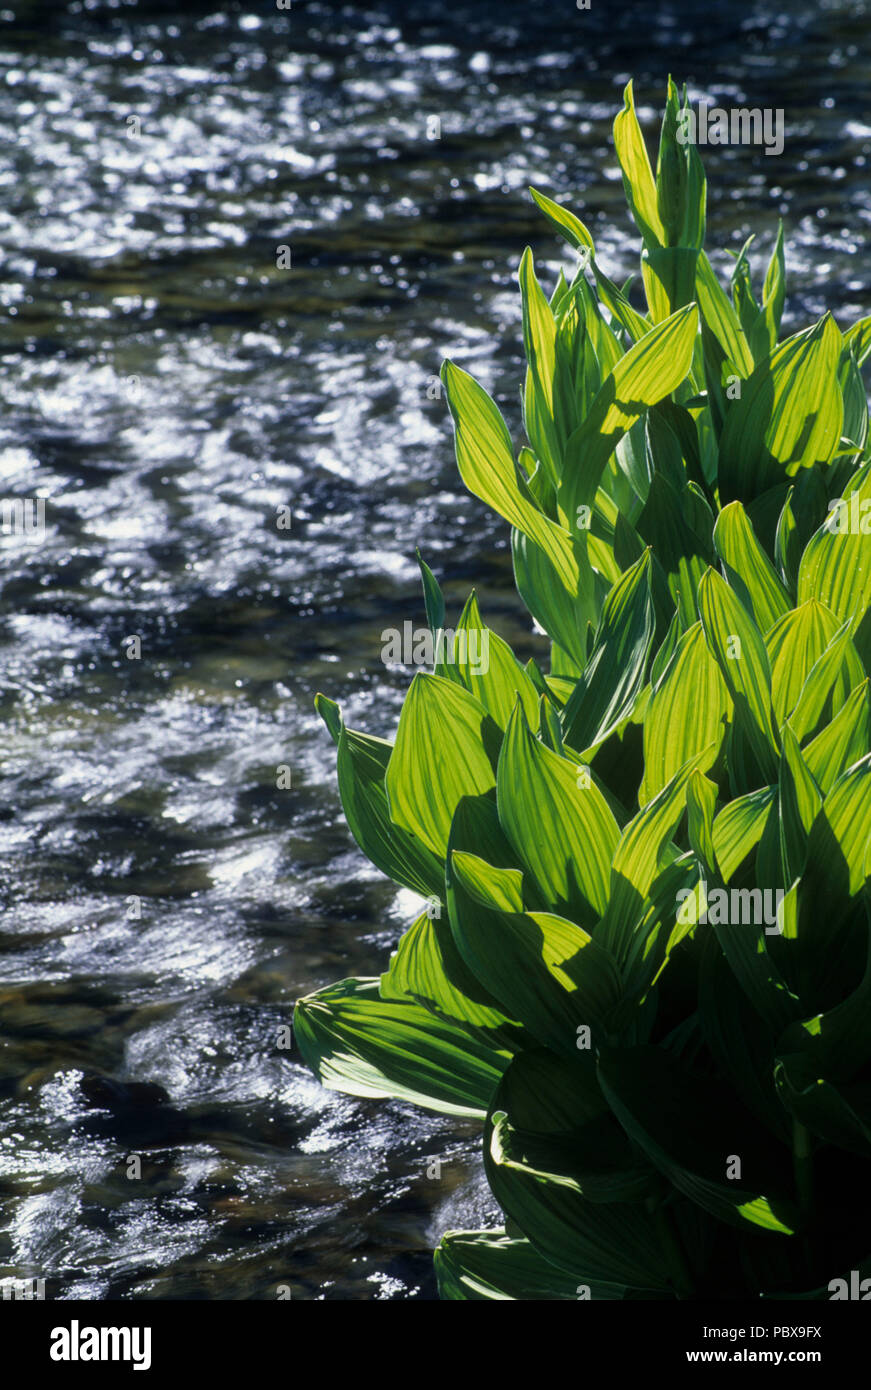 False hellebore on the Deschutes Wild & Scenic River, Cascade Lakes National Scenic Byway, Deschutes National Forest, Oregon Stock Photo